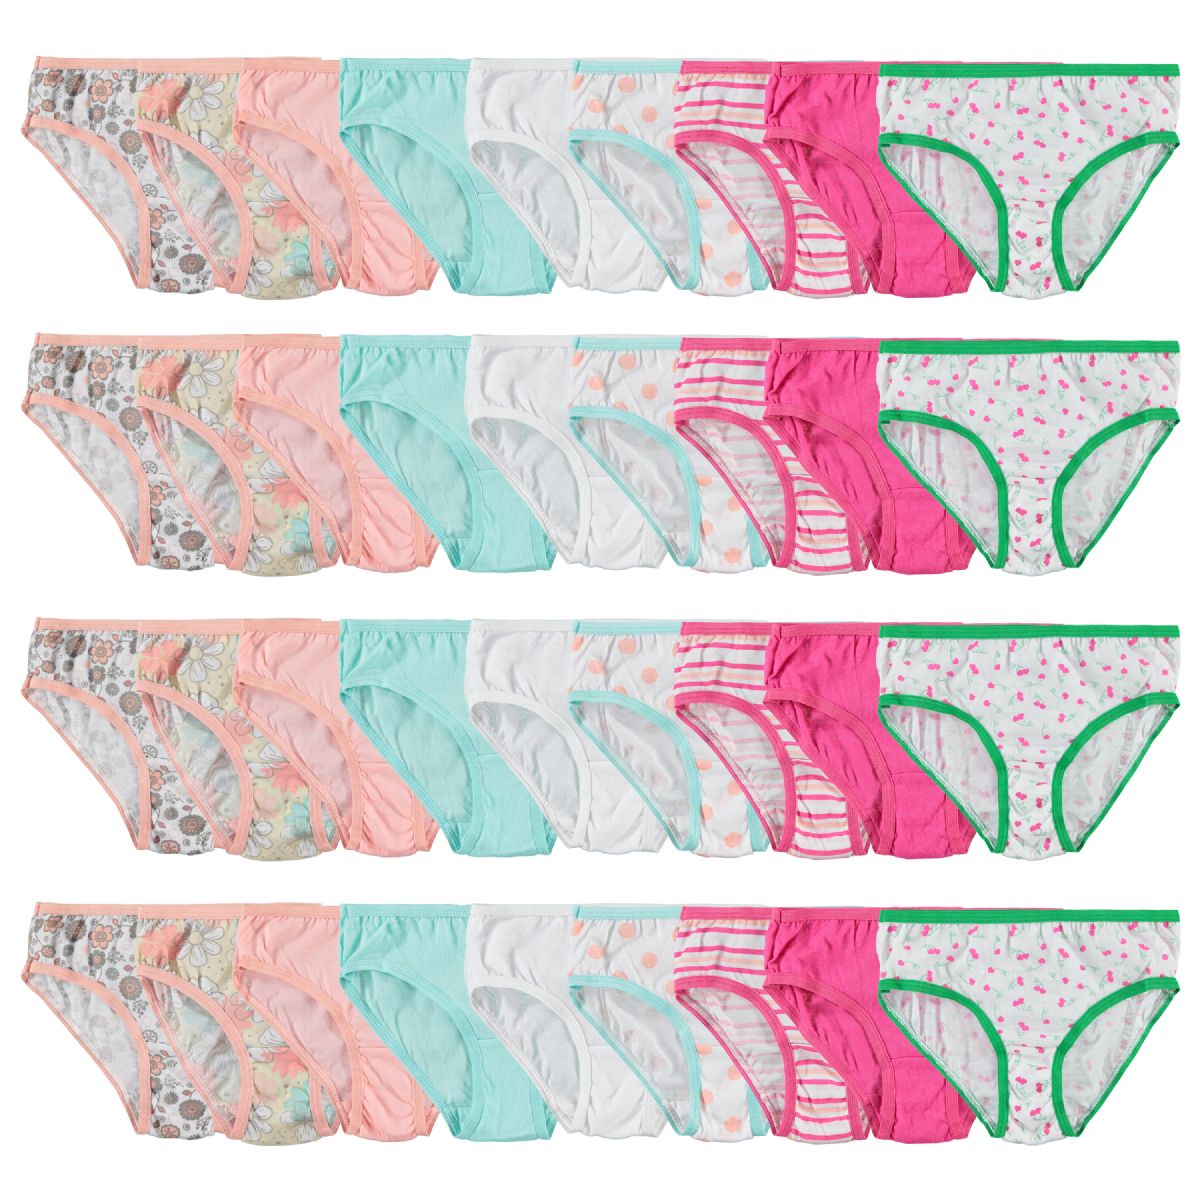 72 Wholesale Girls Cotton Blend Assorted Printed Underwear Size 2-3t - at 